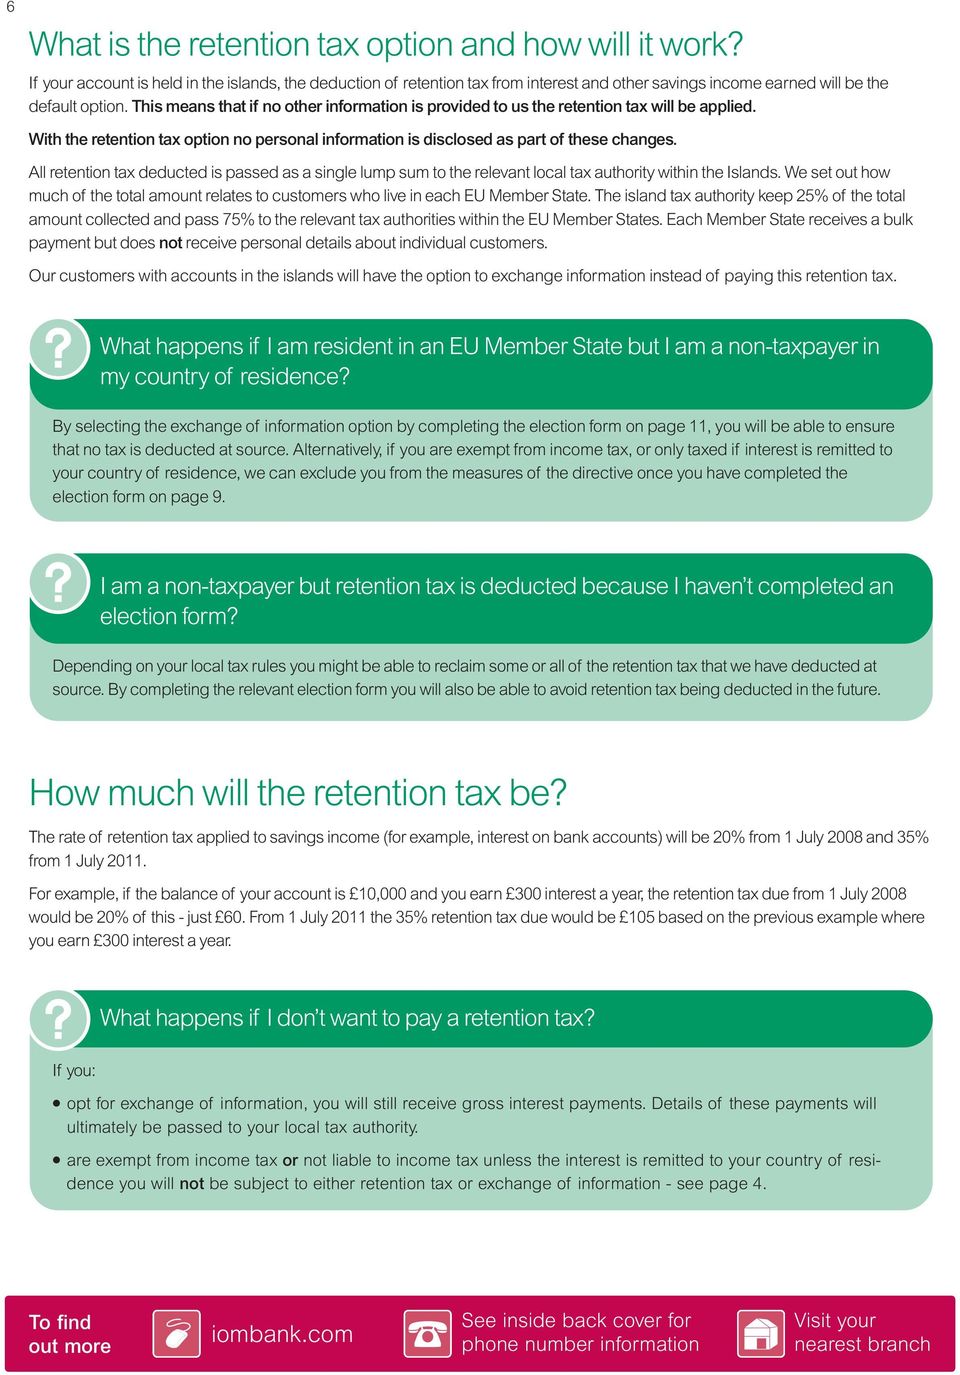 This means that if no other information is provided to us the retention tax will be applied. With the retention tax option no personal information is disclosed as part of these changes.